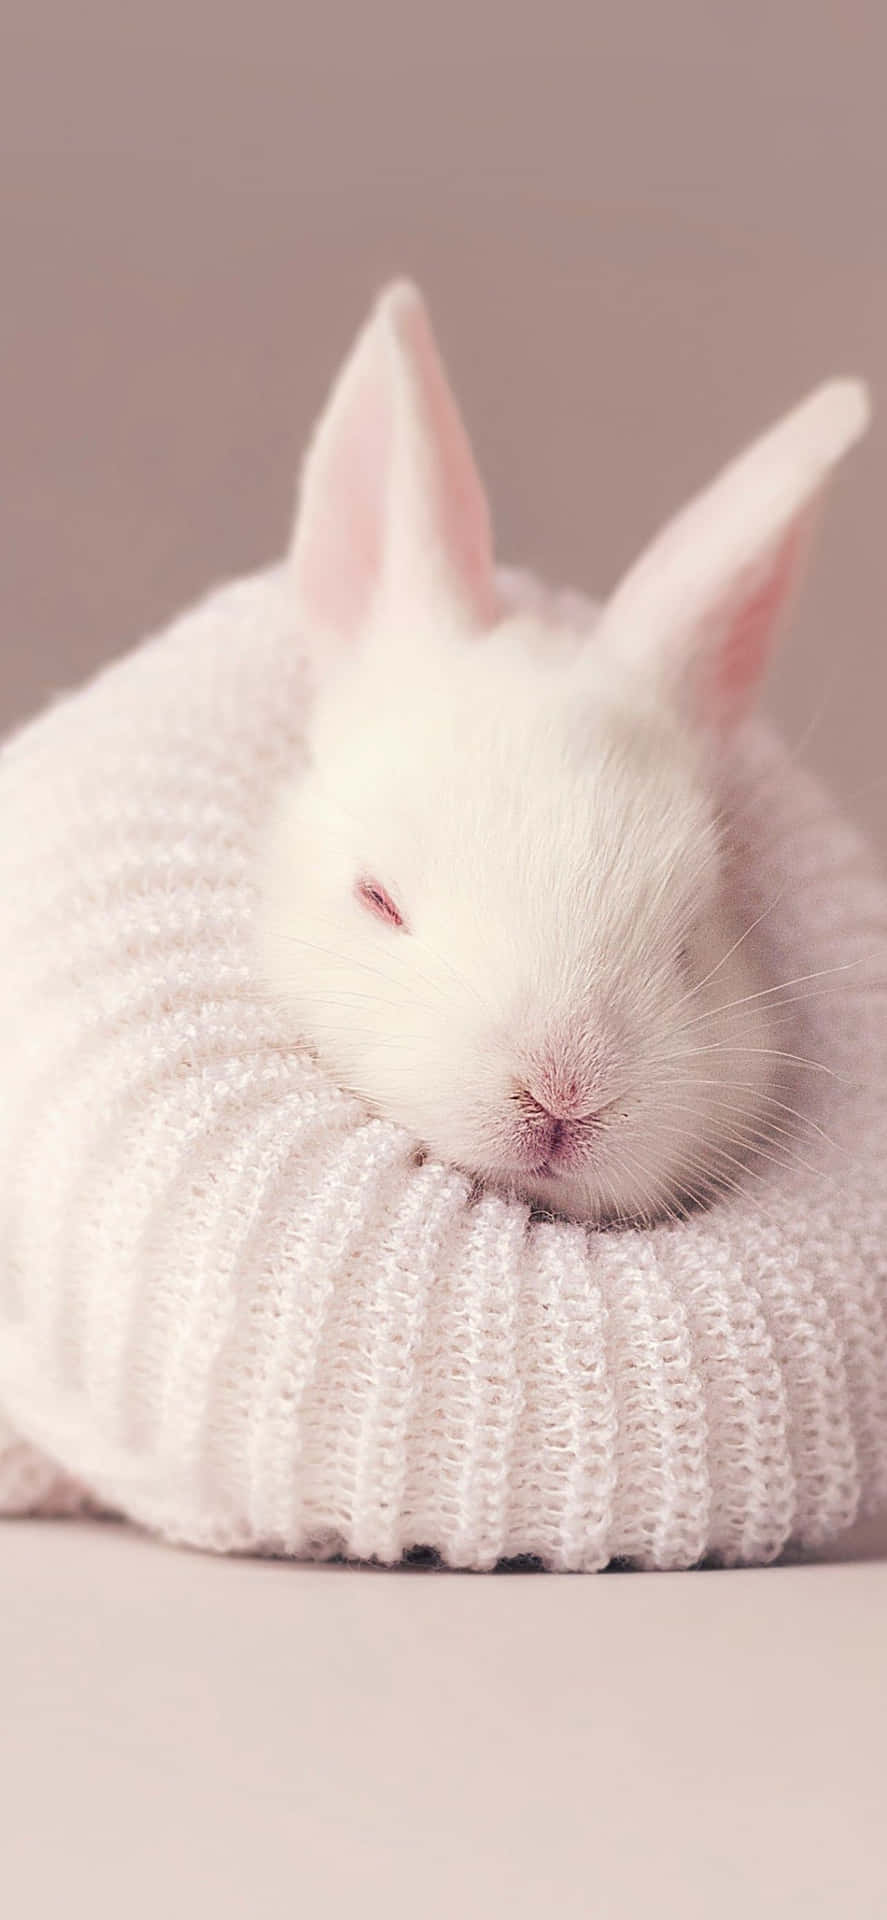 A White Rabbit Sleeping In A Knitted Pillow